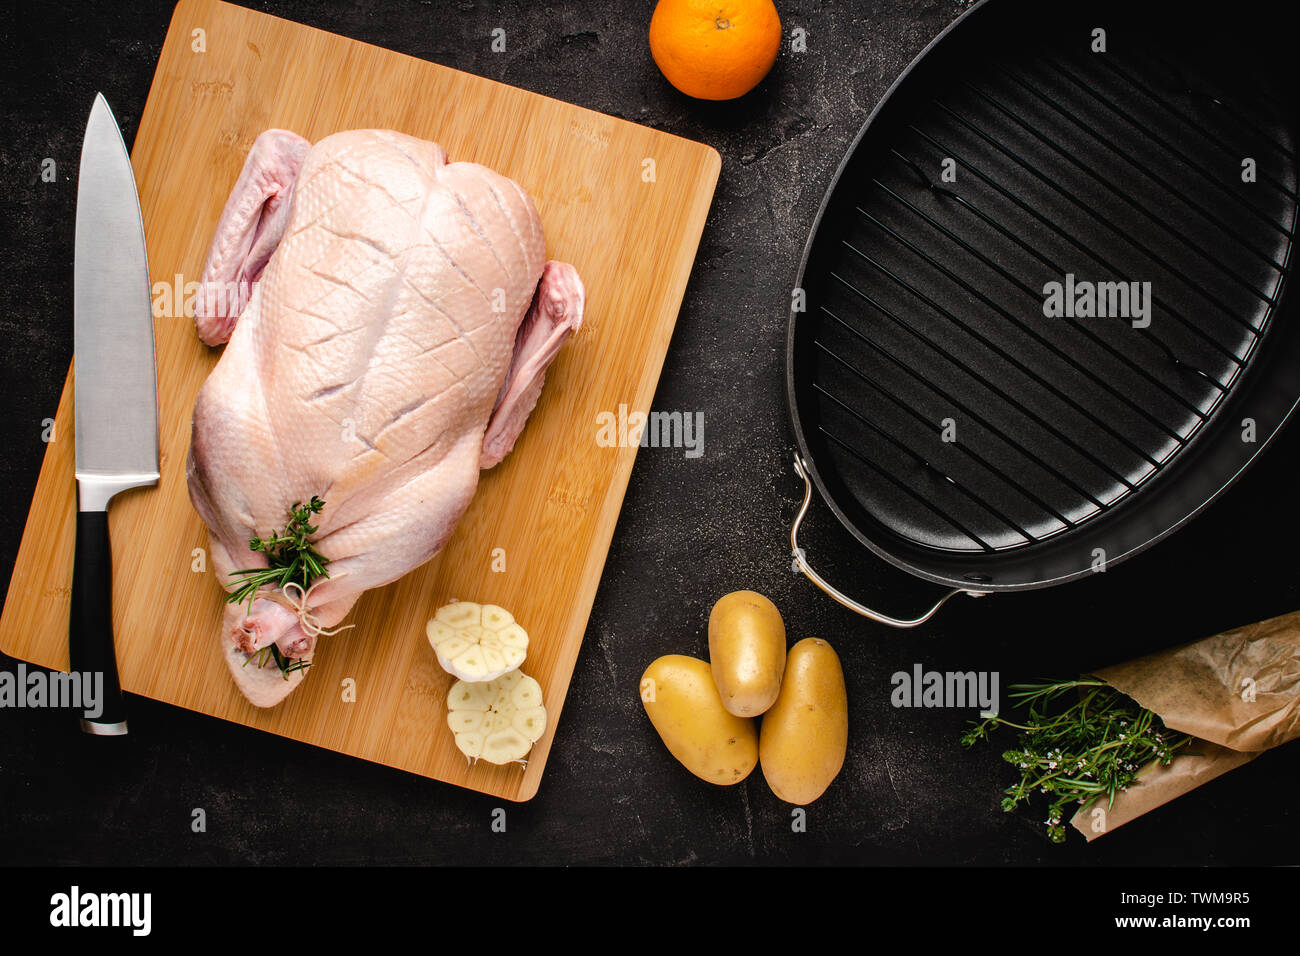 Whole Duck Fresh and Raw on Chopping Board with Ingredients Ready to Cook. Recipe Preparation Concept. Stock Photo